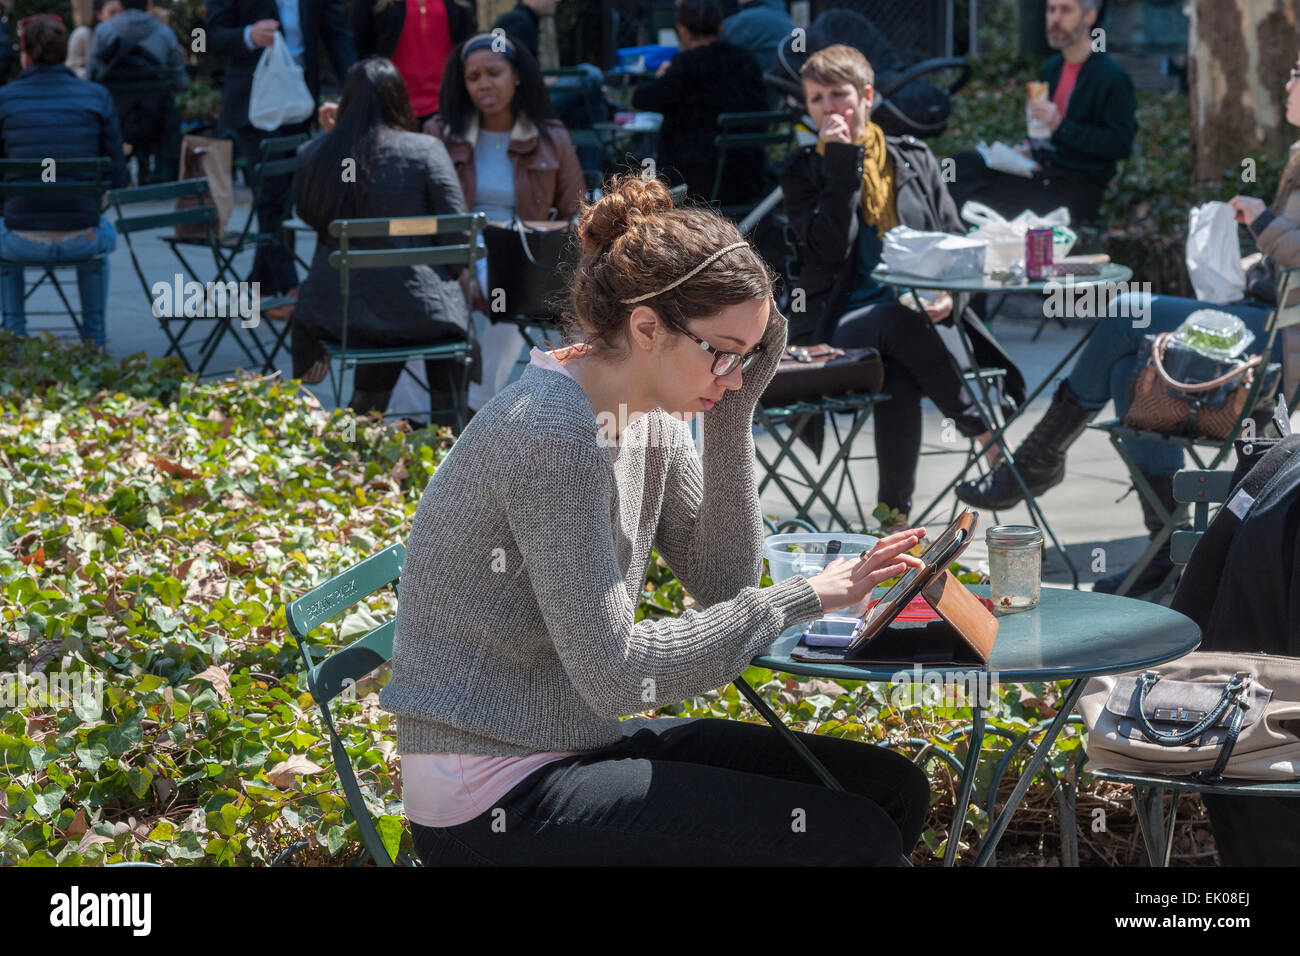 A woman uses he iPad, joining other park goers shedding the winter blues in Bryant Park in New York on Thursday, April 2, 2015. Warm weather in the mid 60's attracted office workers and tourists to the outdoors. (© Richard B. Levine) Stock Photo